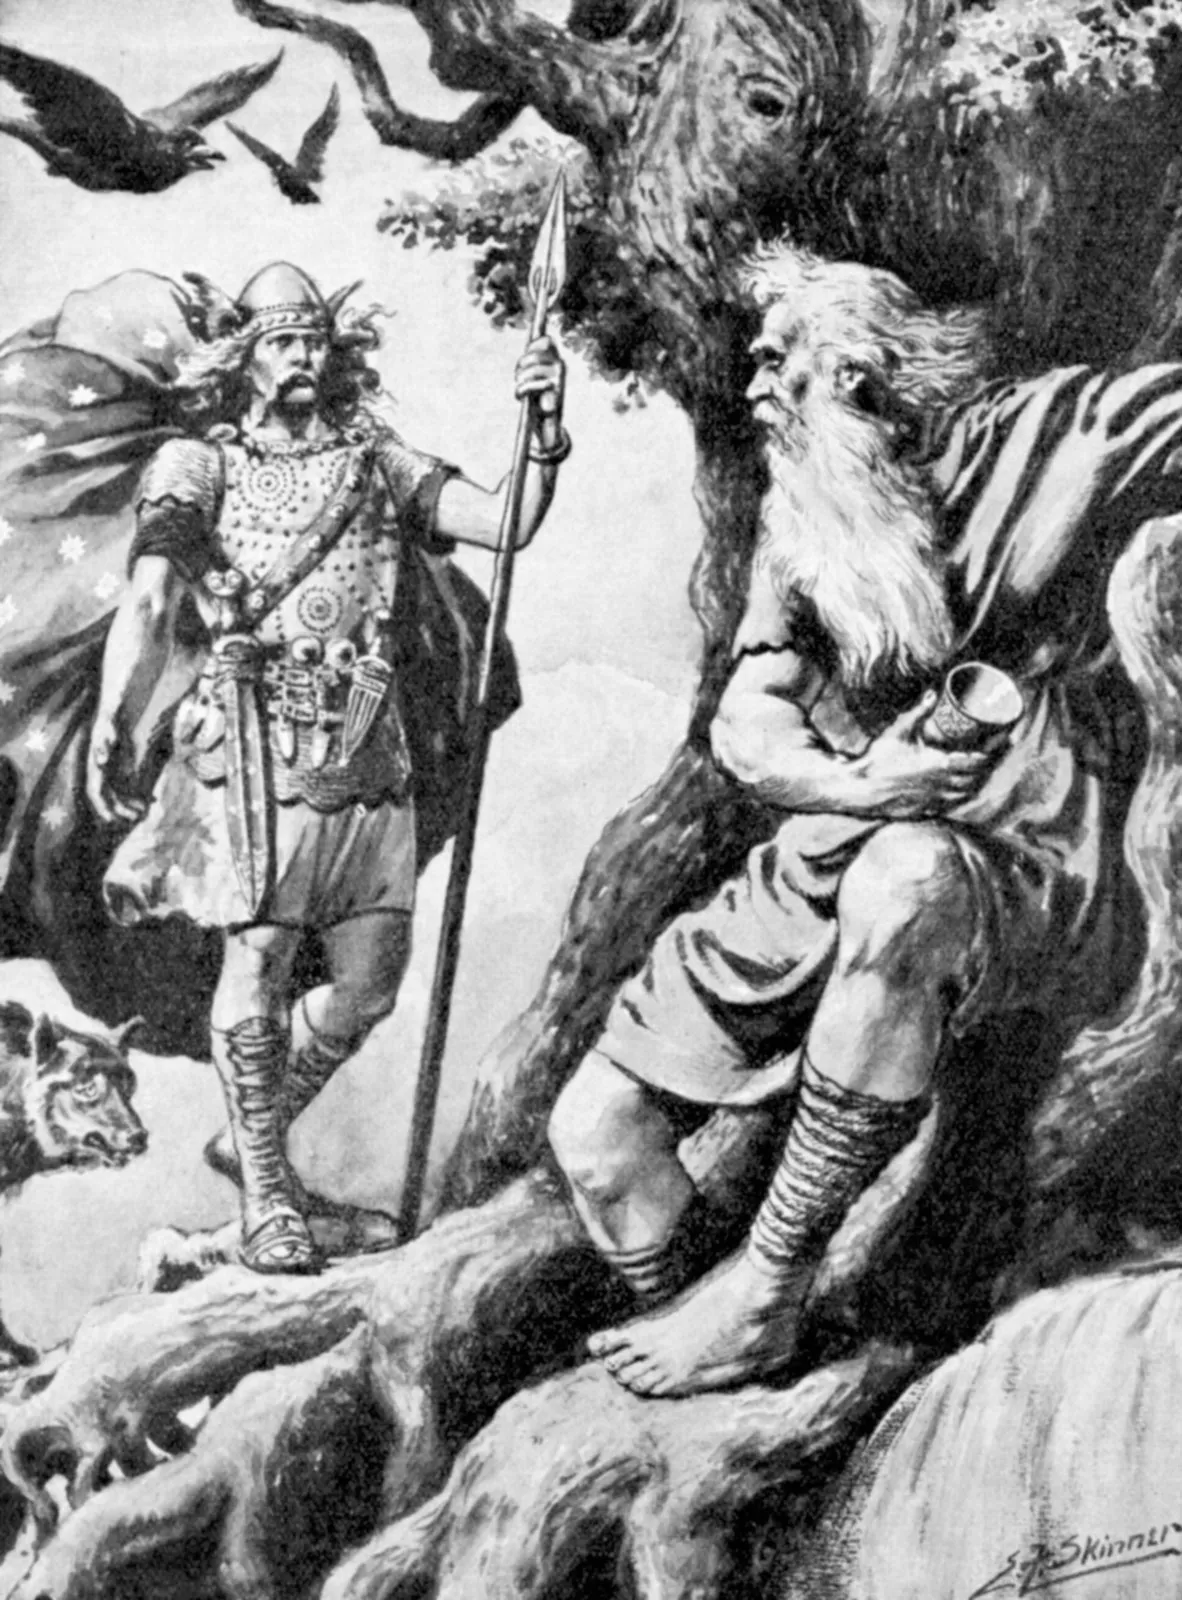 Odin Norse god approaching Mimir